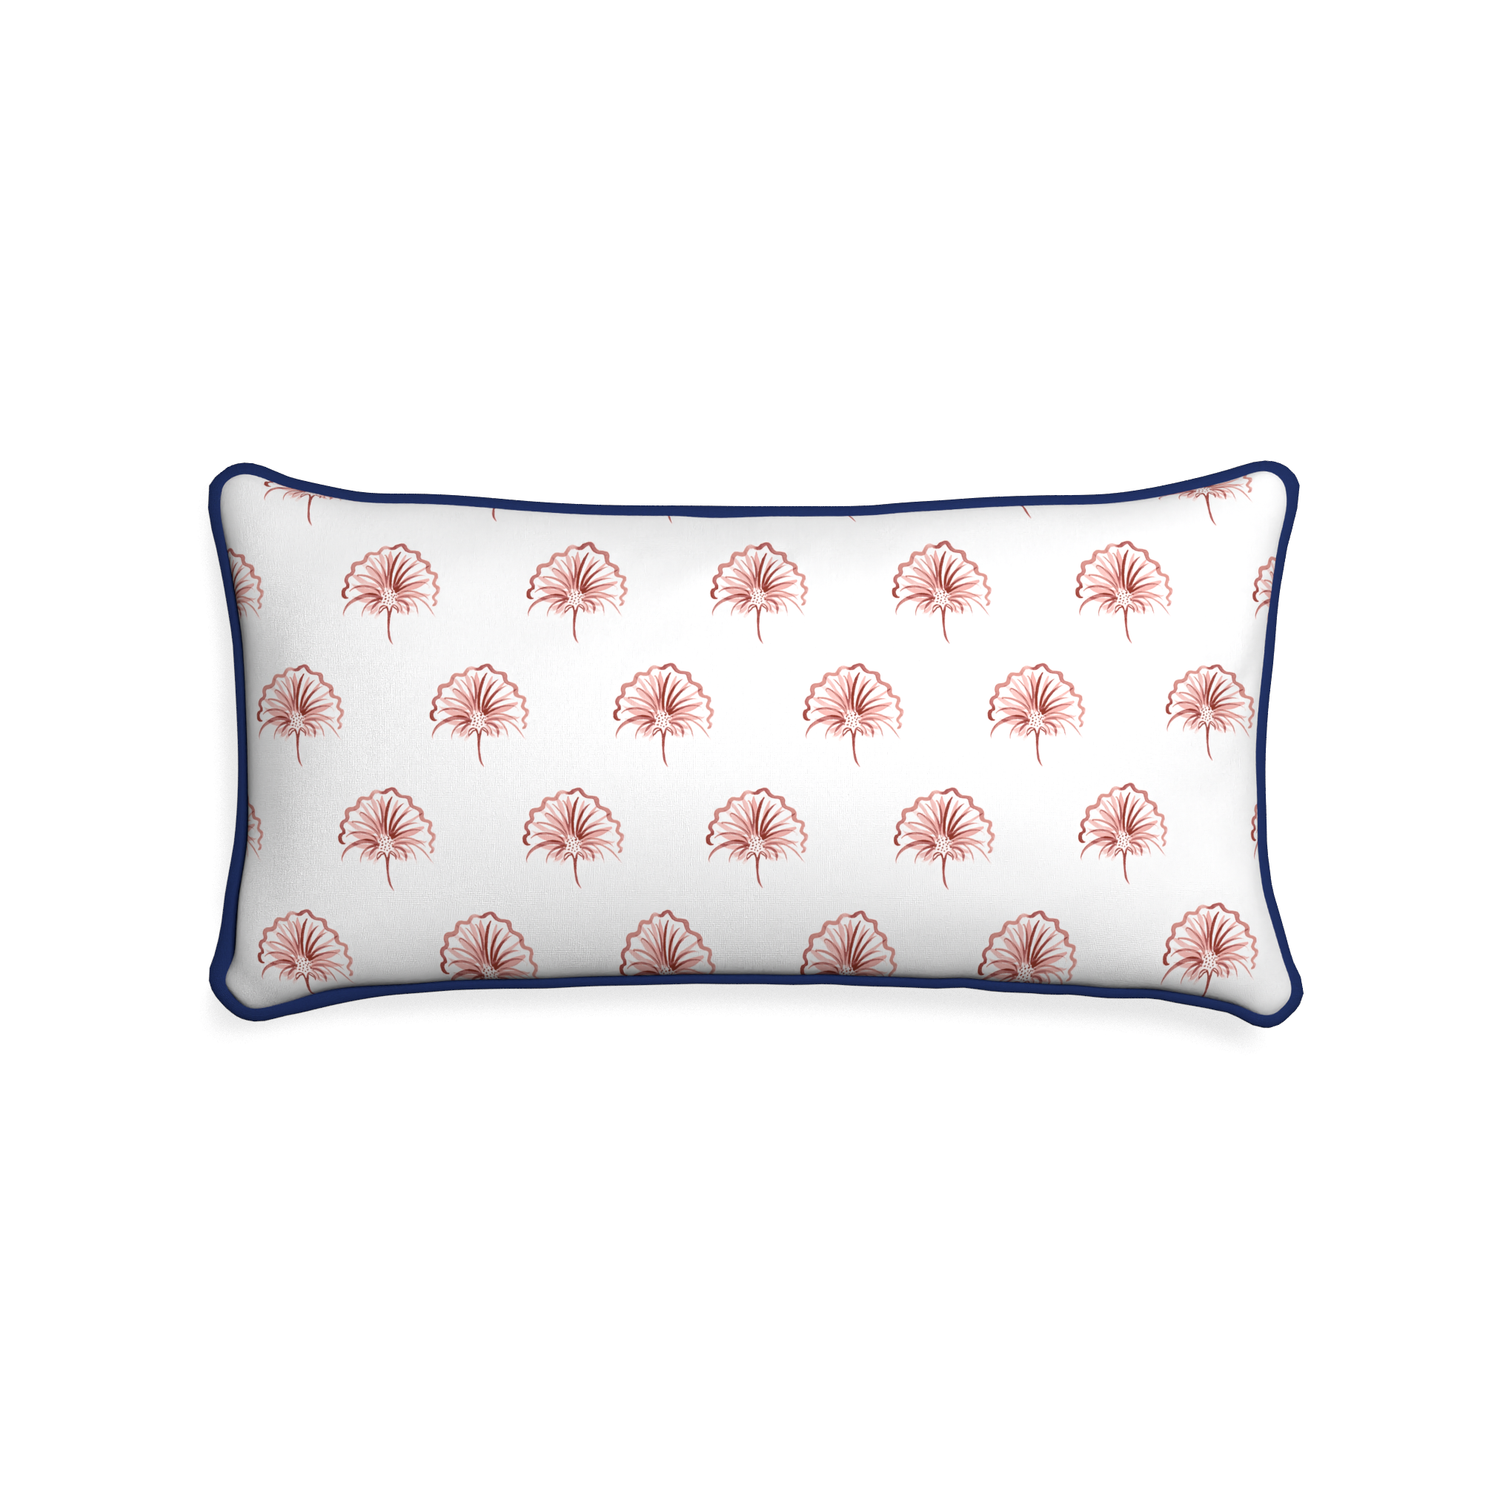 Midi-lumbar penelope rose custom floral pinkpillow with midnight piping on white background